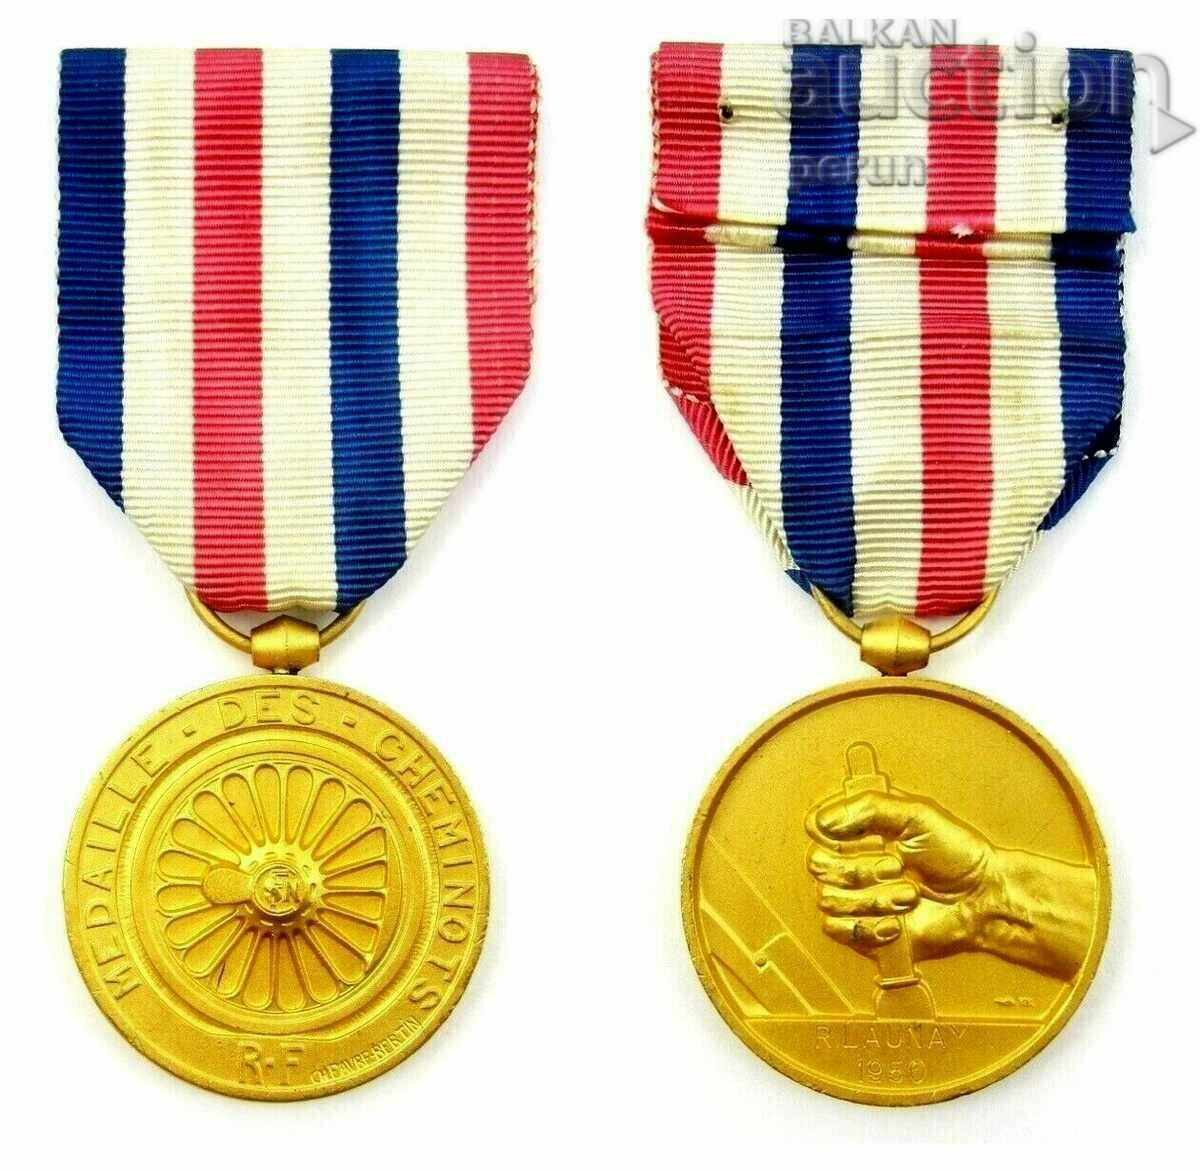 Honorary Gold Medal of the French Railways-Railways